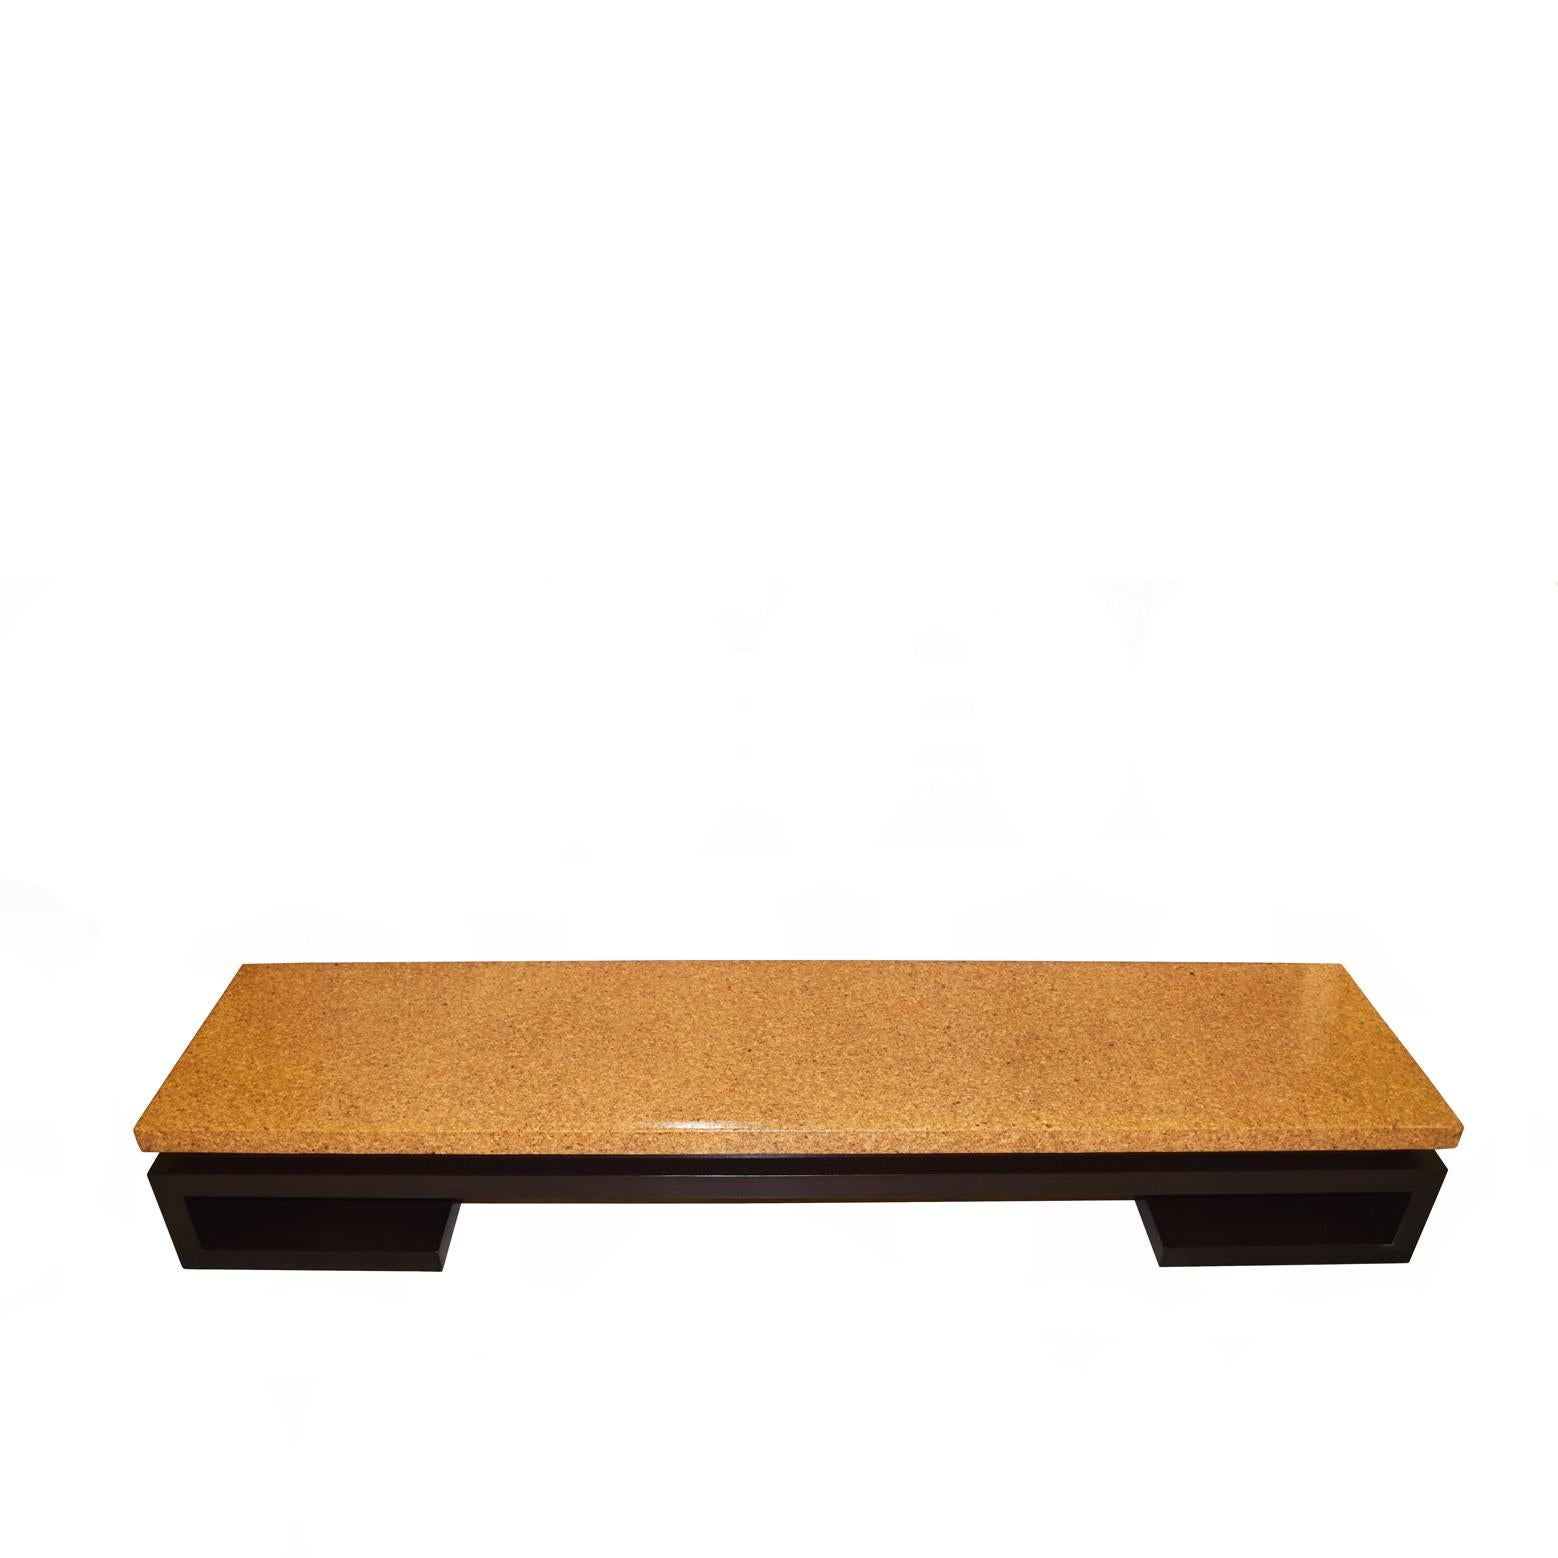 Modern Paul Frankl Low Cork Table/Bench 1940’s Fot Johnson Furniture Co. For Sale